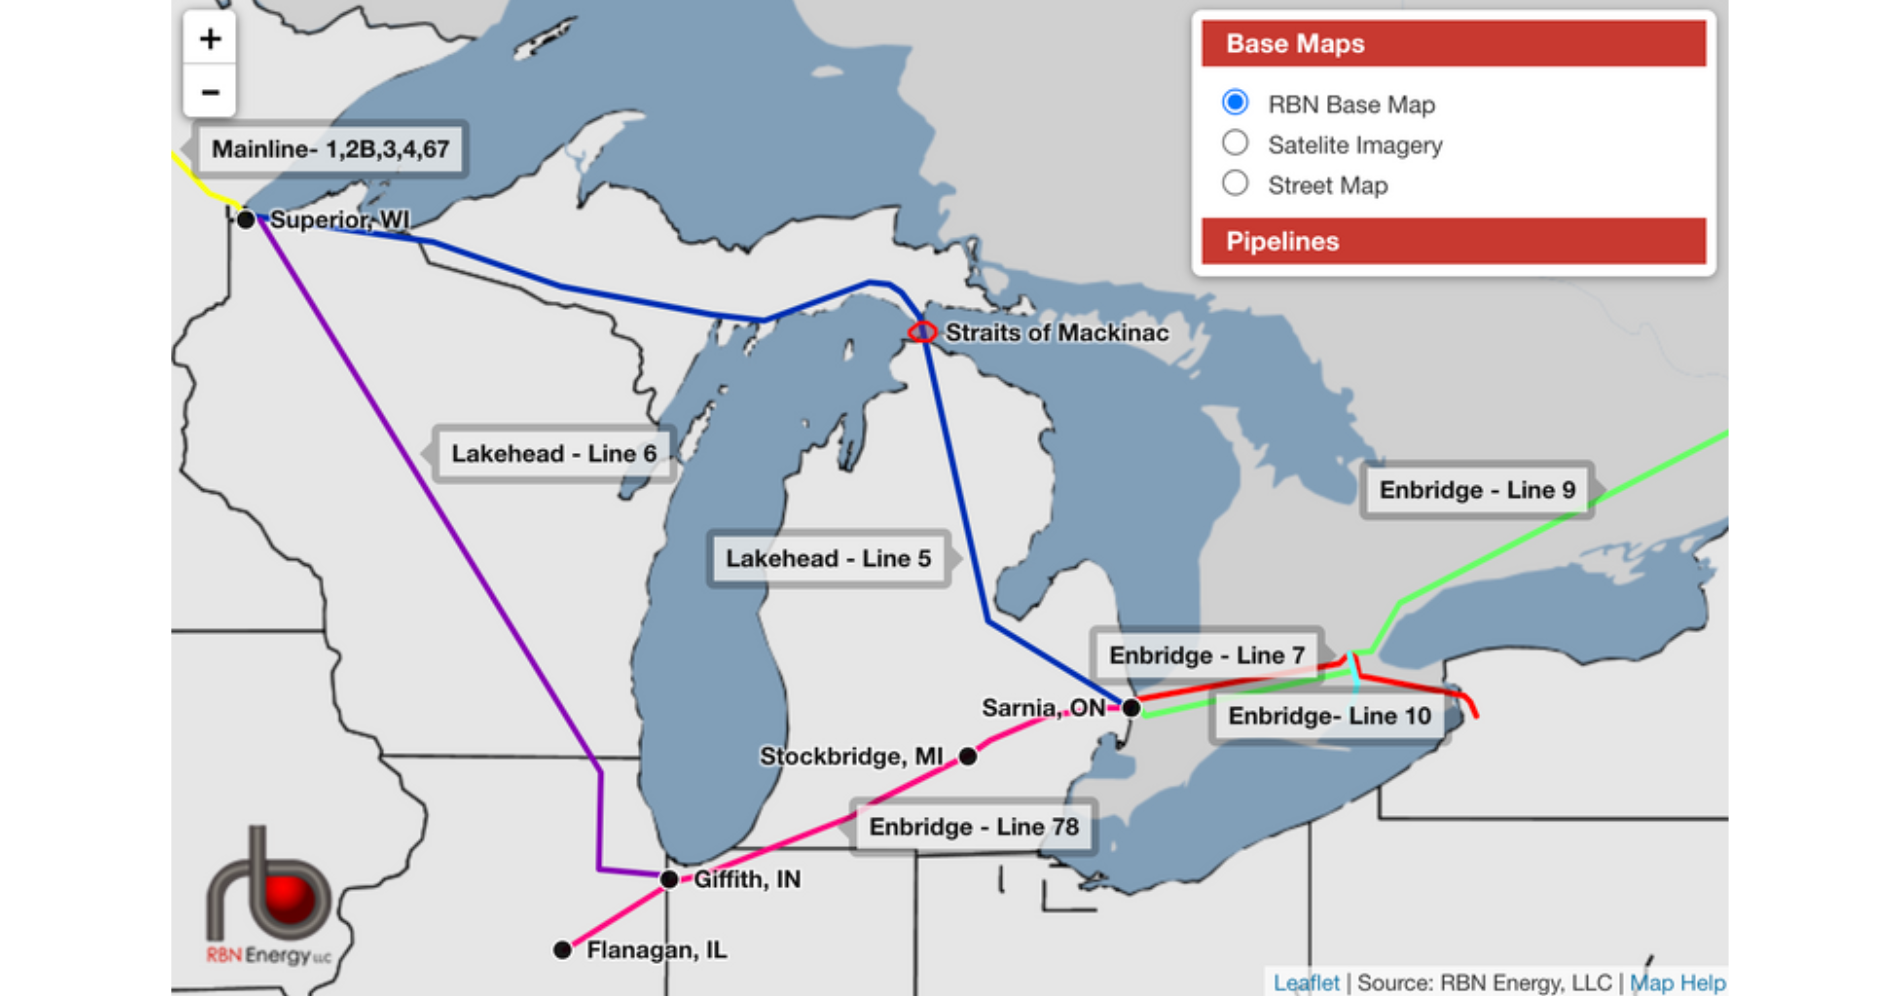 I've Got to Have You Enbridge's Line 5 Faces New Scrutiny RBN Energy